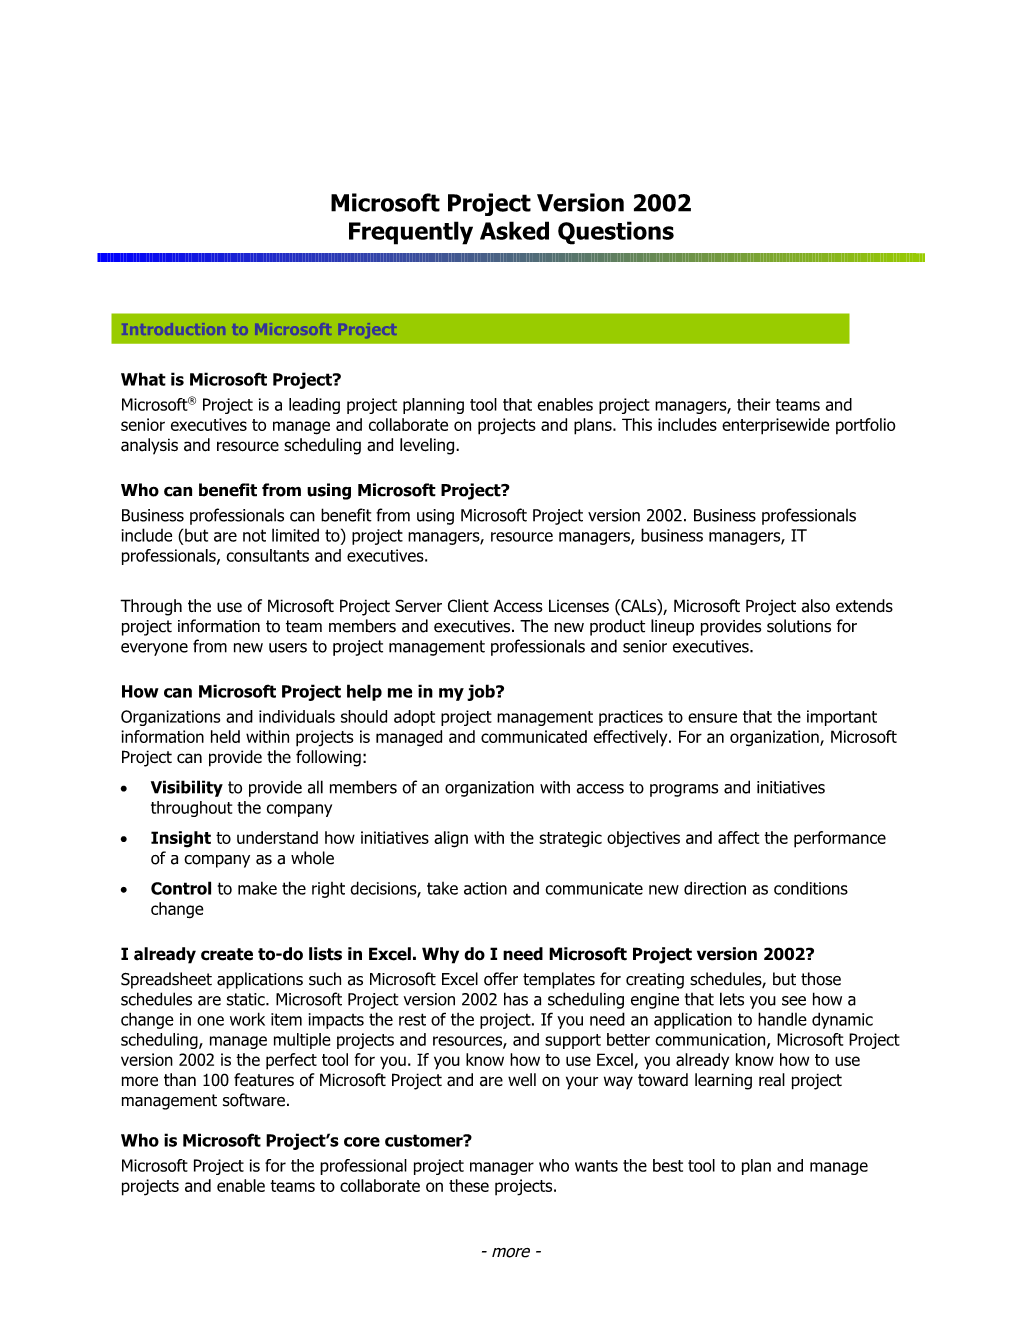 Introduction to Microsoft Project Top